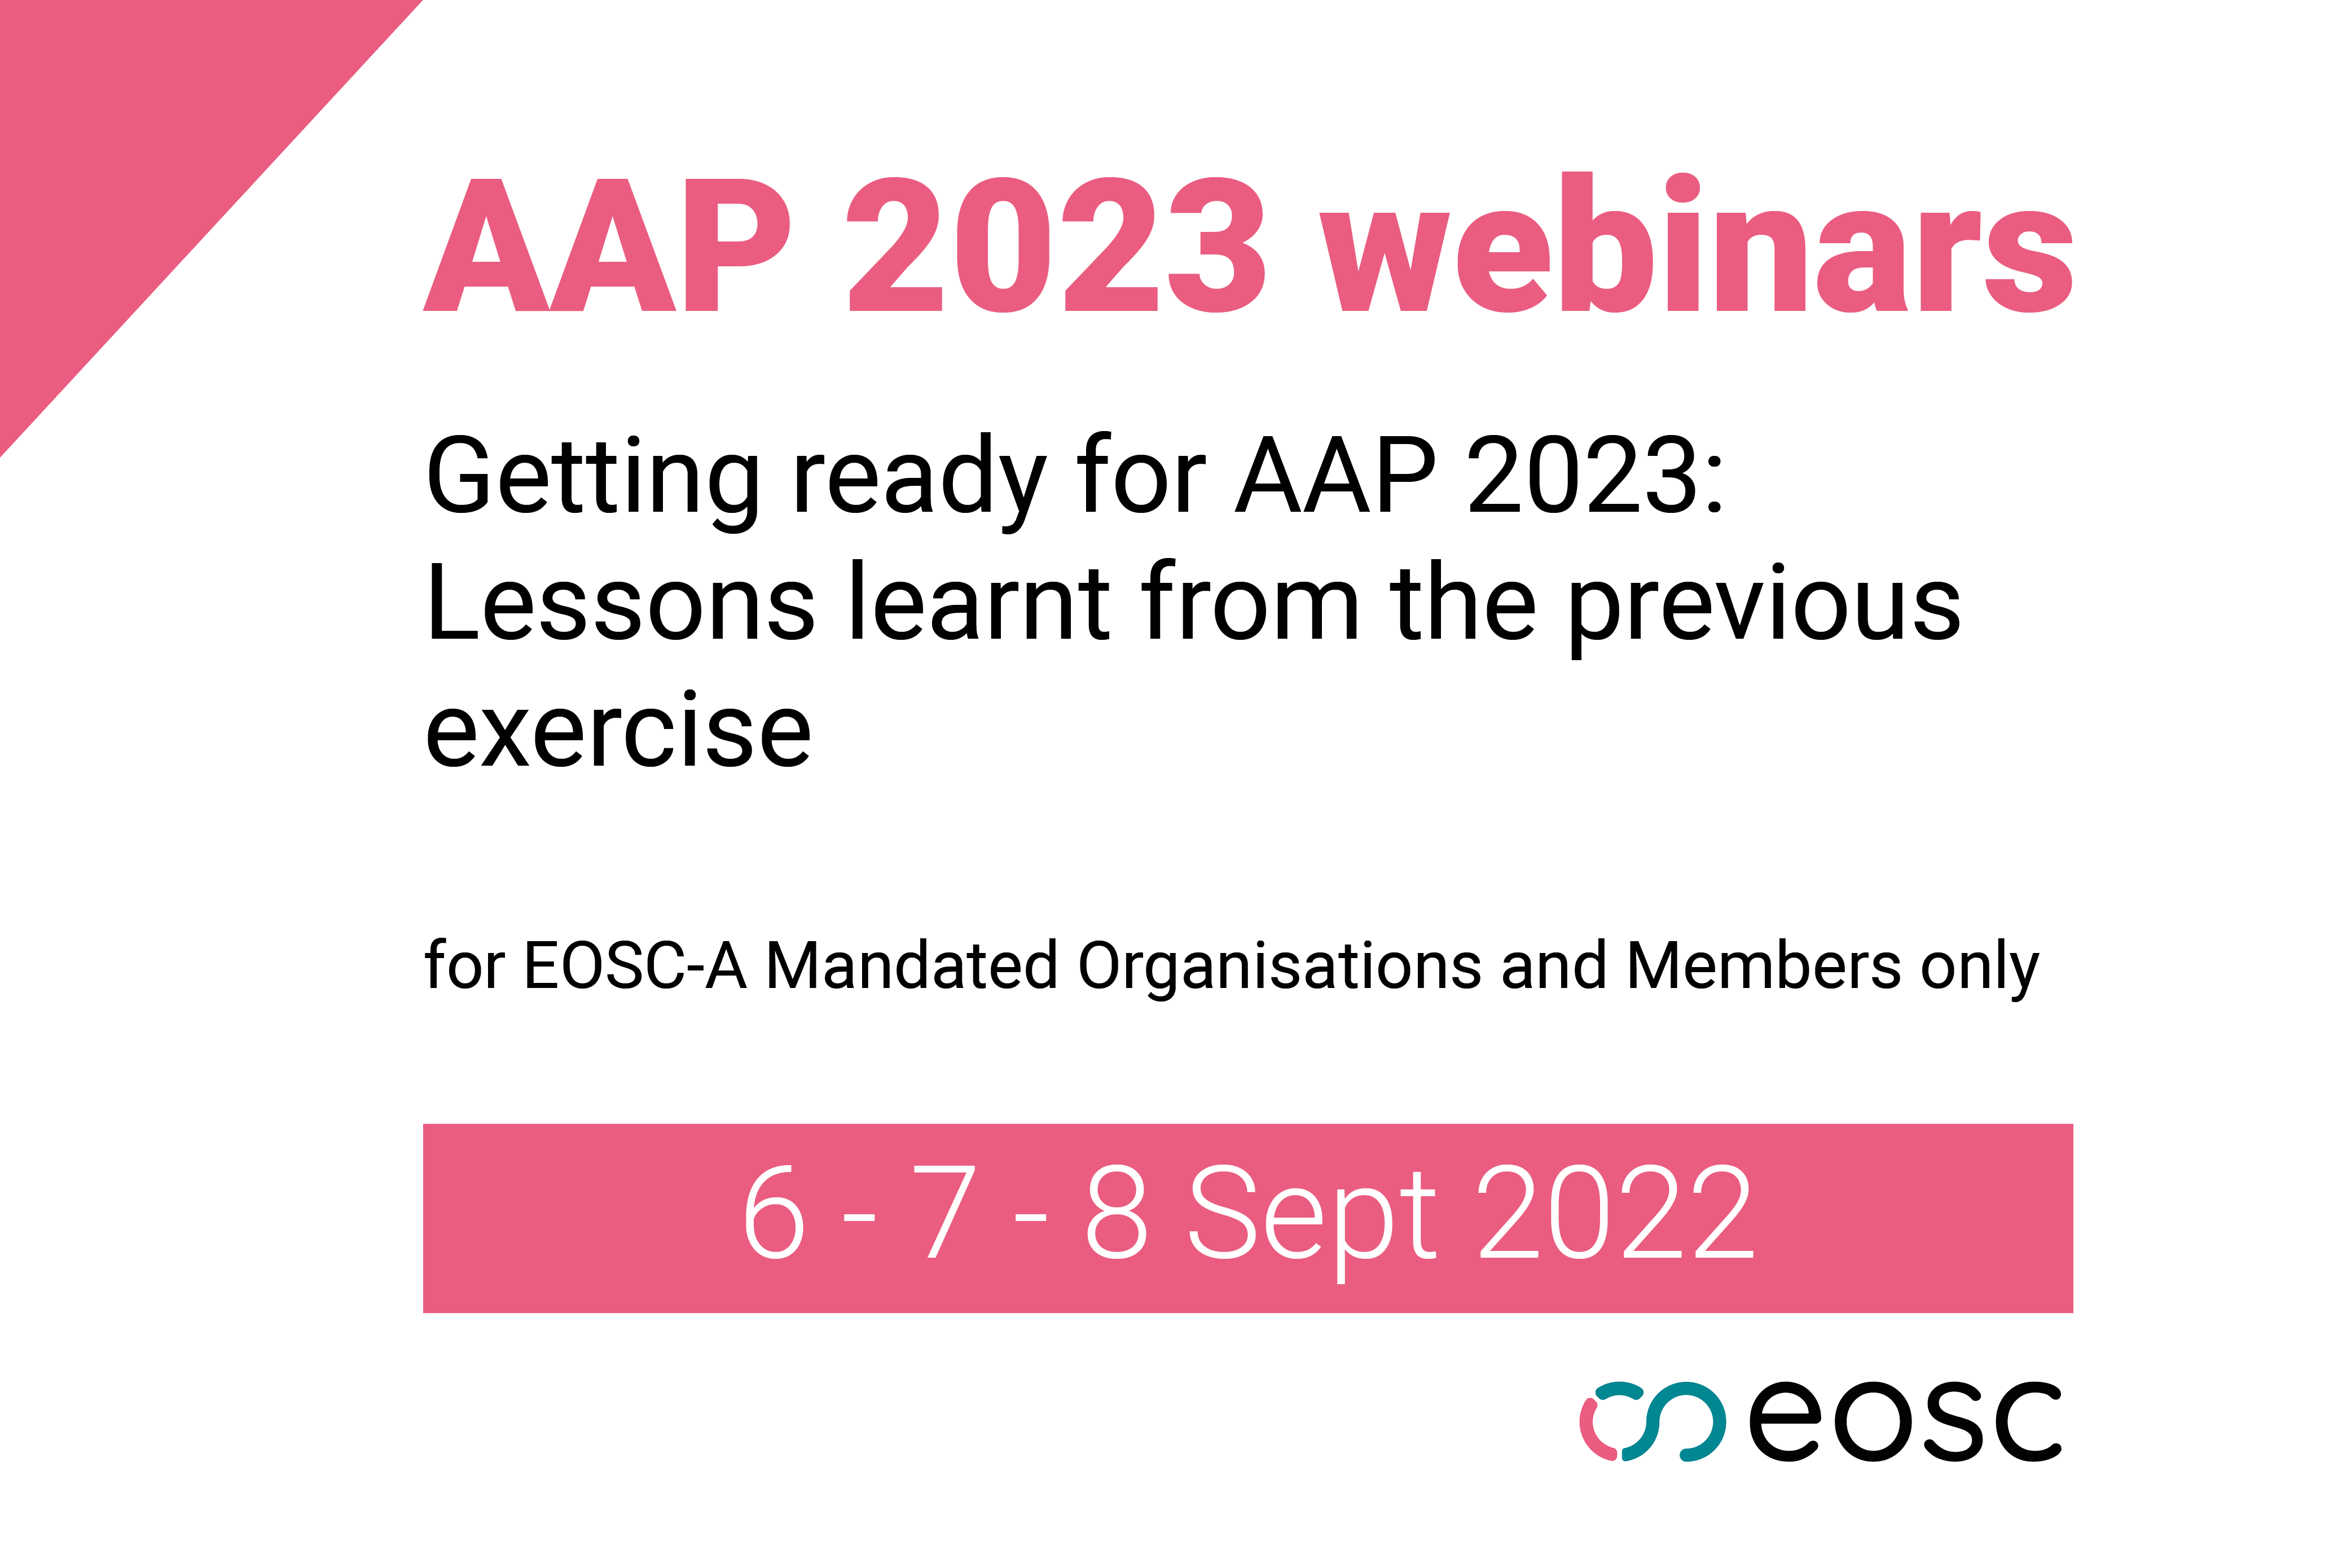 Getting ready for AAP 2023: Lessons learnt from the previous exercise |  EOSC Association